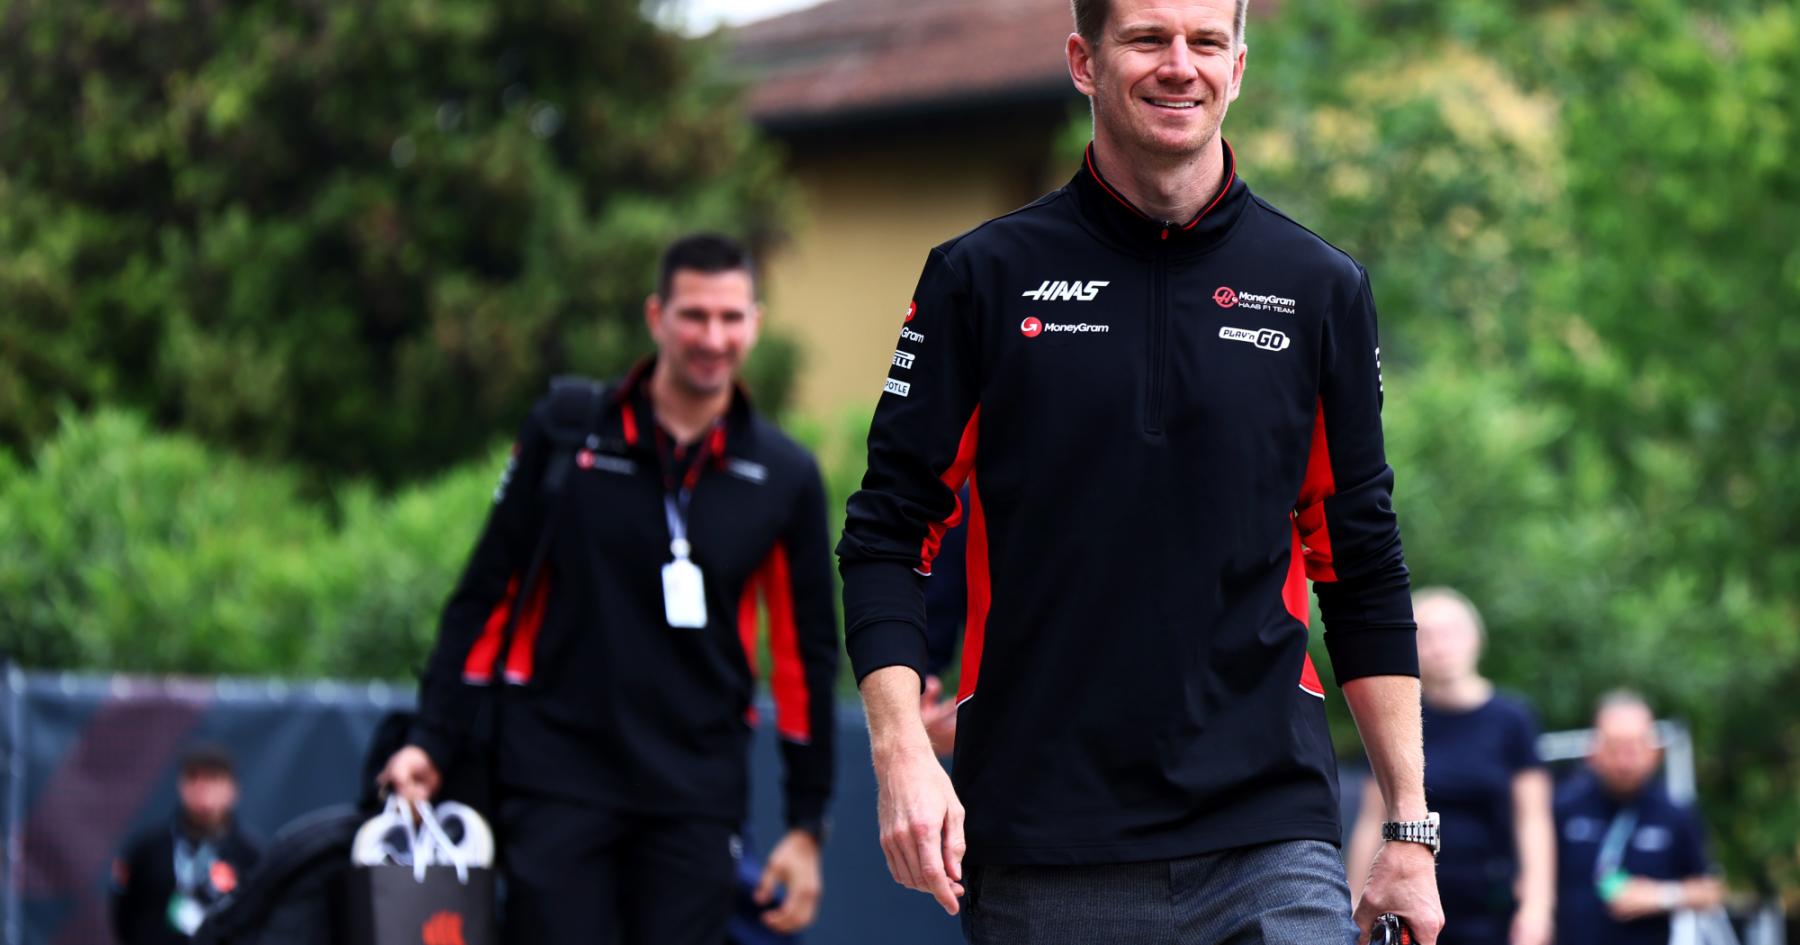 Champion Nico Hulkenberg takes a stand: Magnussen's tactics were self-serving in Miami clash